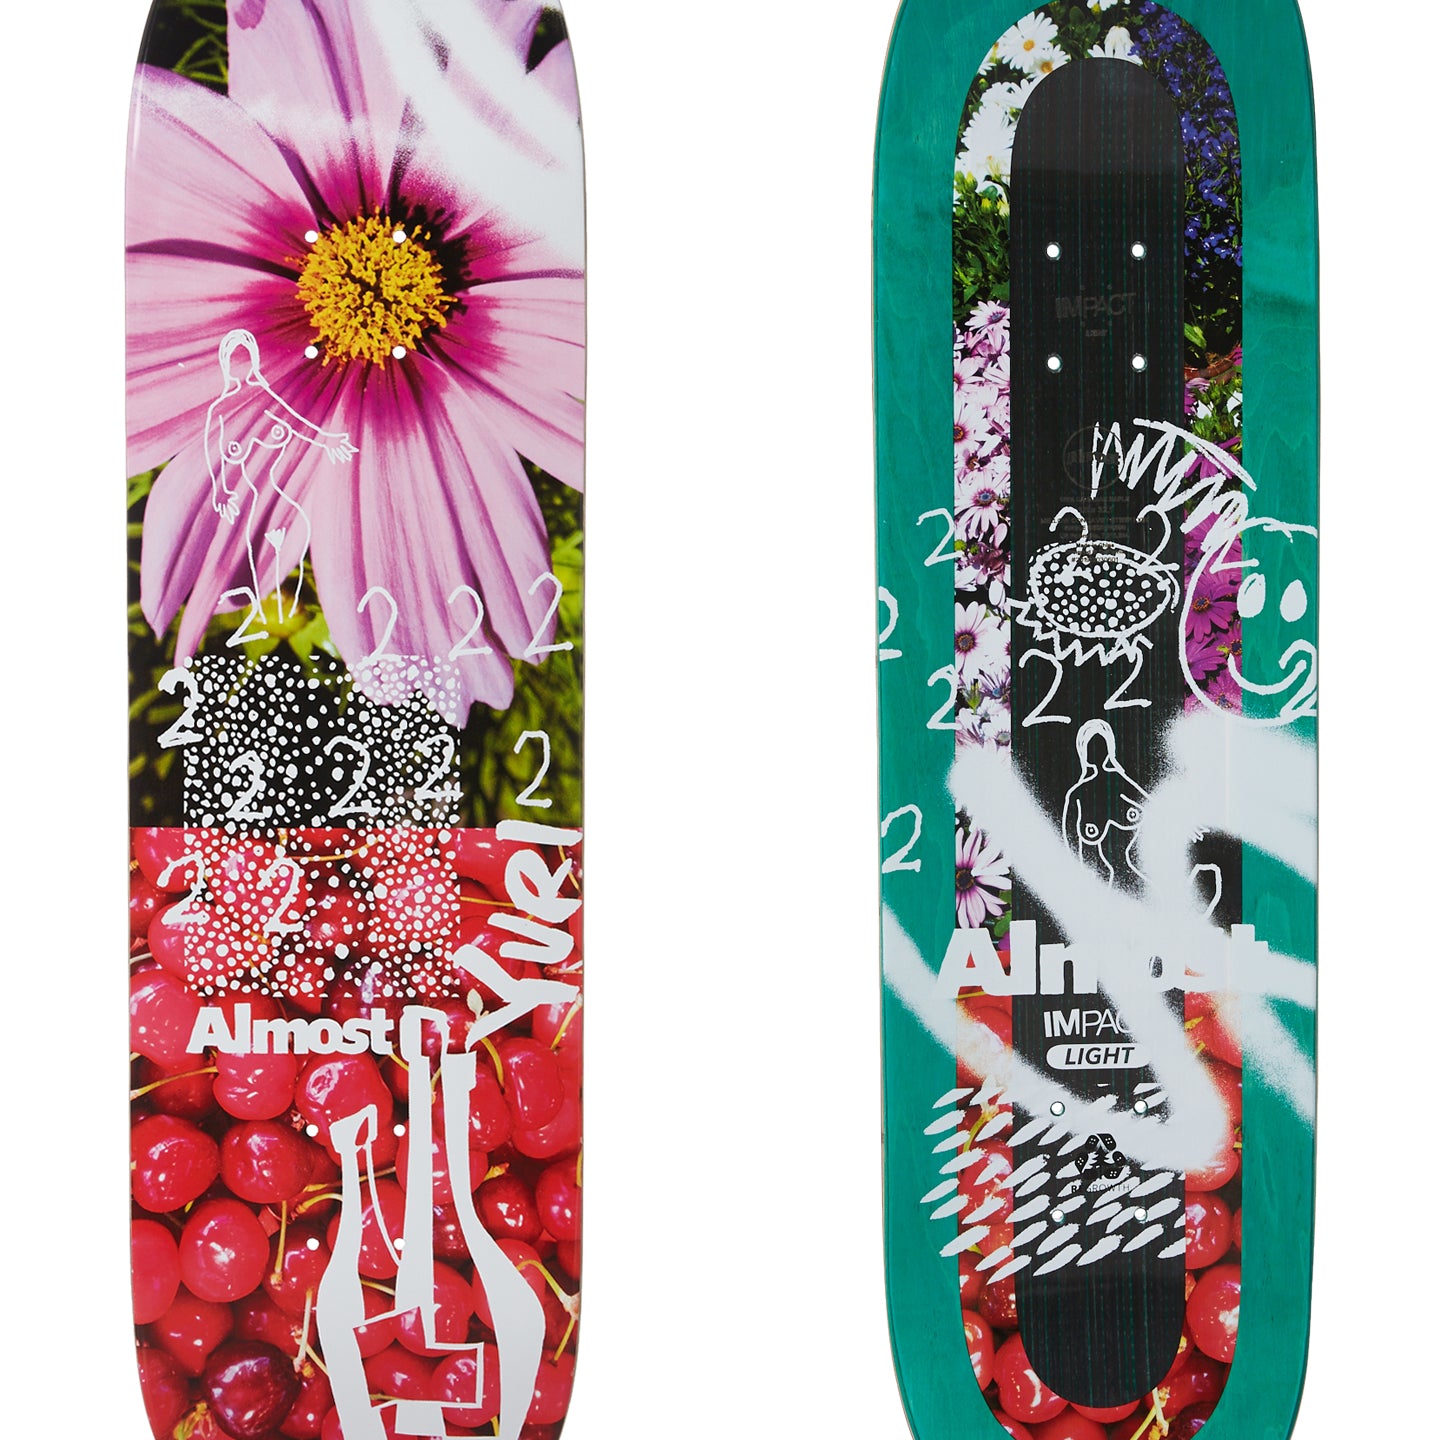 Almost In Bloom Impact Light Yuri 8.5 - Skateboard Deck Top And Bottom